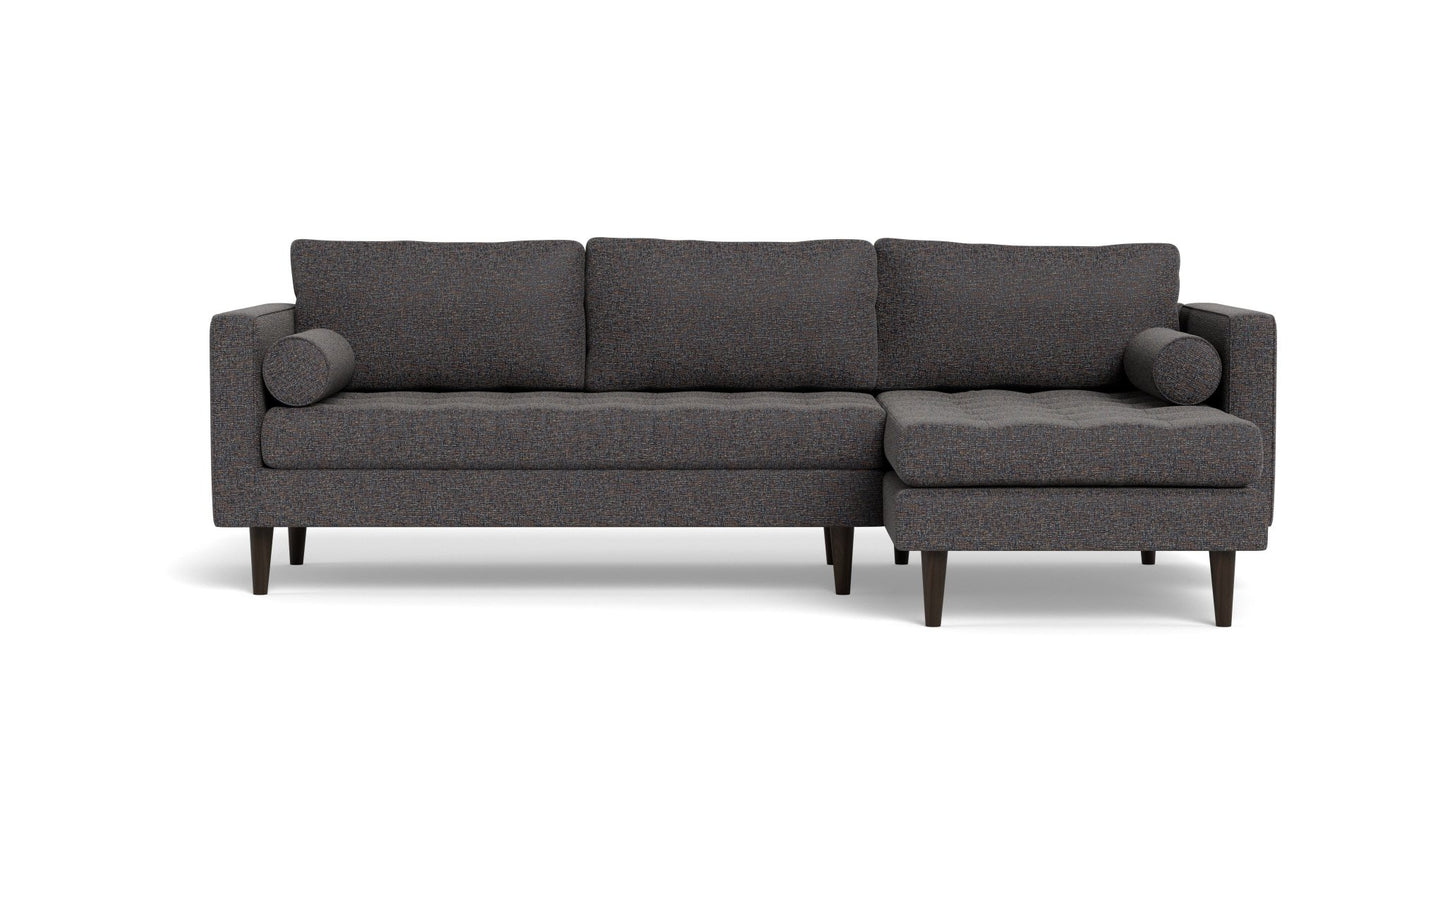 Ladybird Right Chaise Sectional - Cordova Eclipse